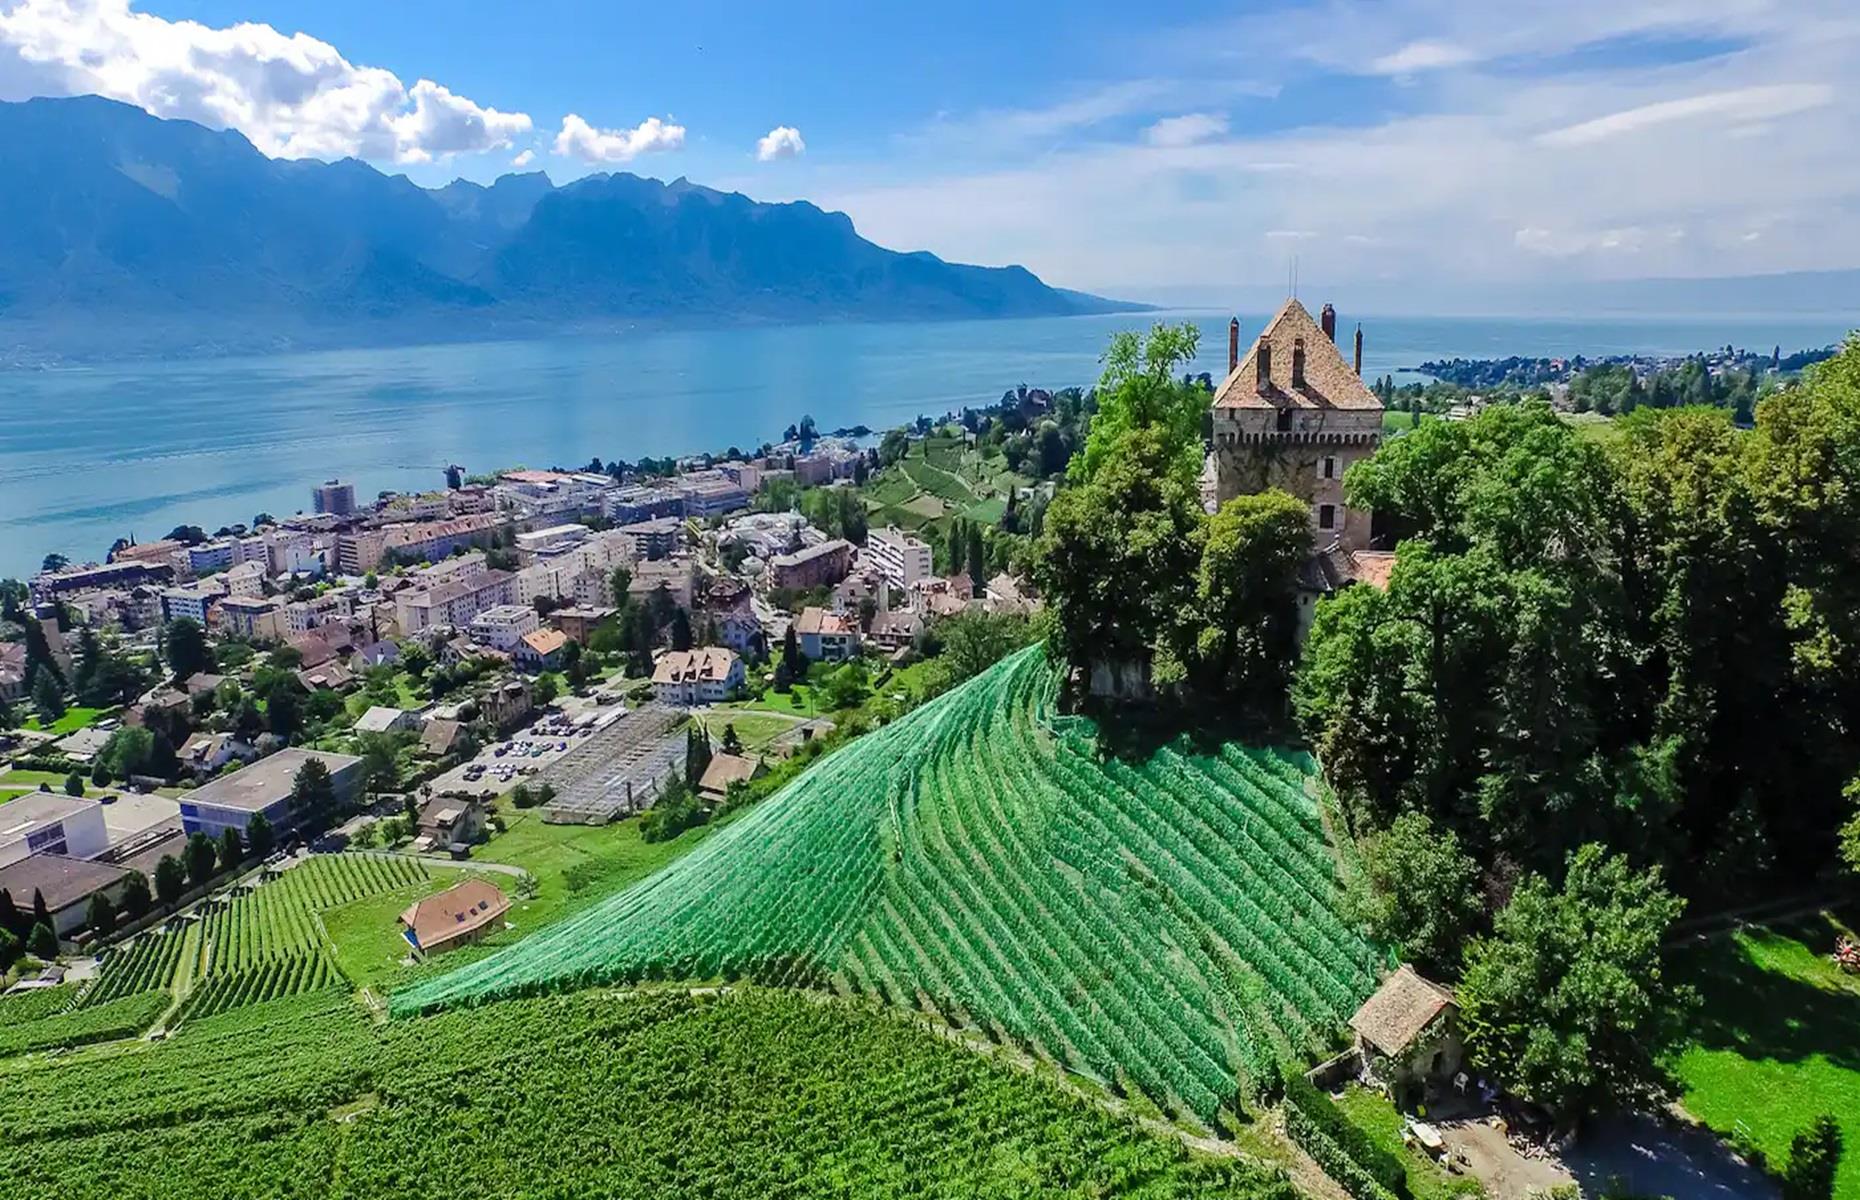 <p>Guests can explore the castle's ancient grounds and enjoy access to some of the country's most impressive natural landscapes. In fact, from many of the windows, you can take in vistas of Lake Geneva and the snowy peaks of the Alps. </p>